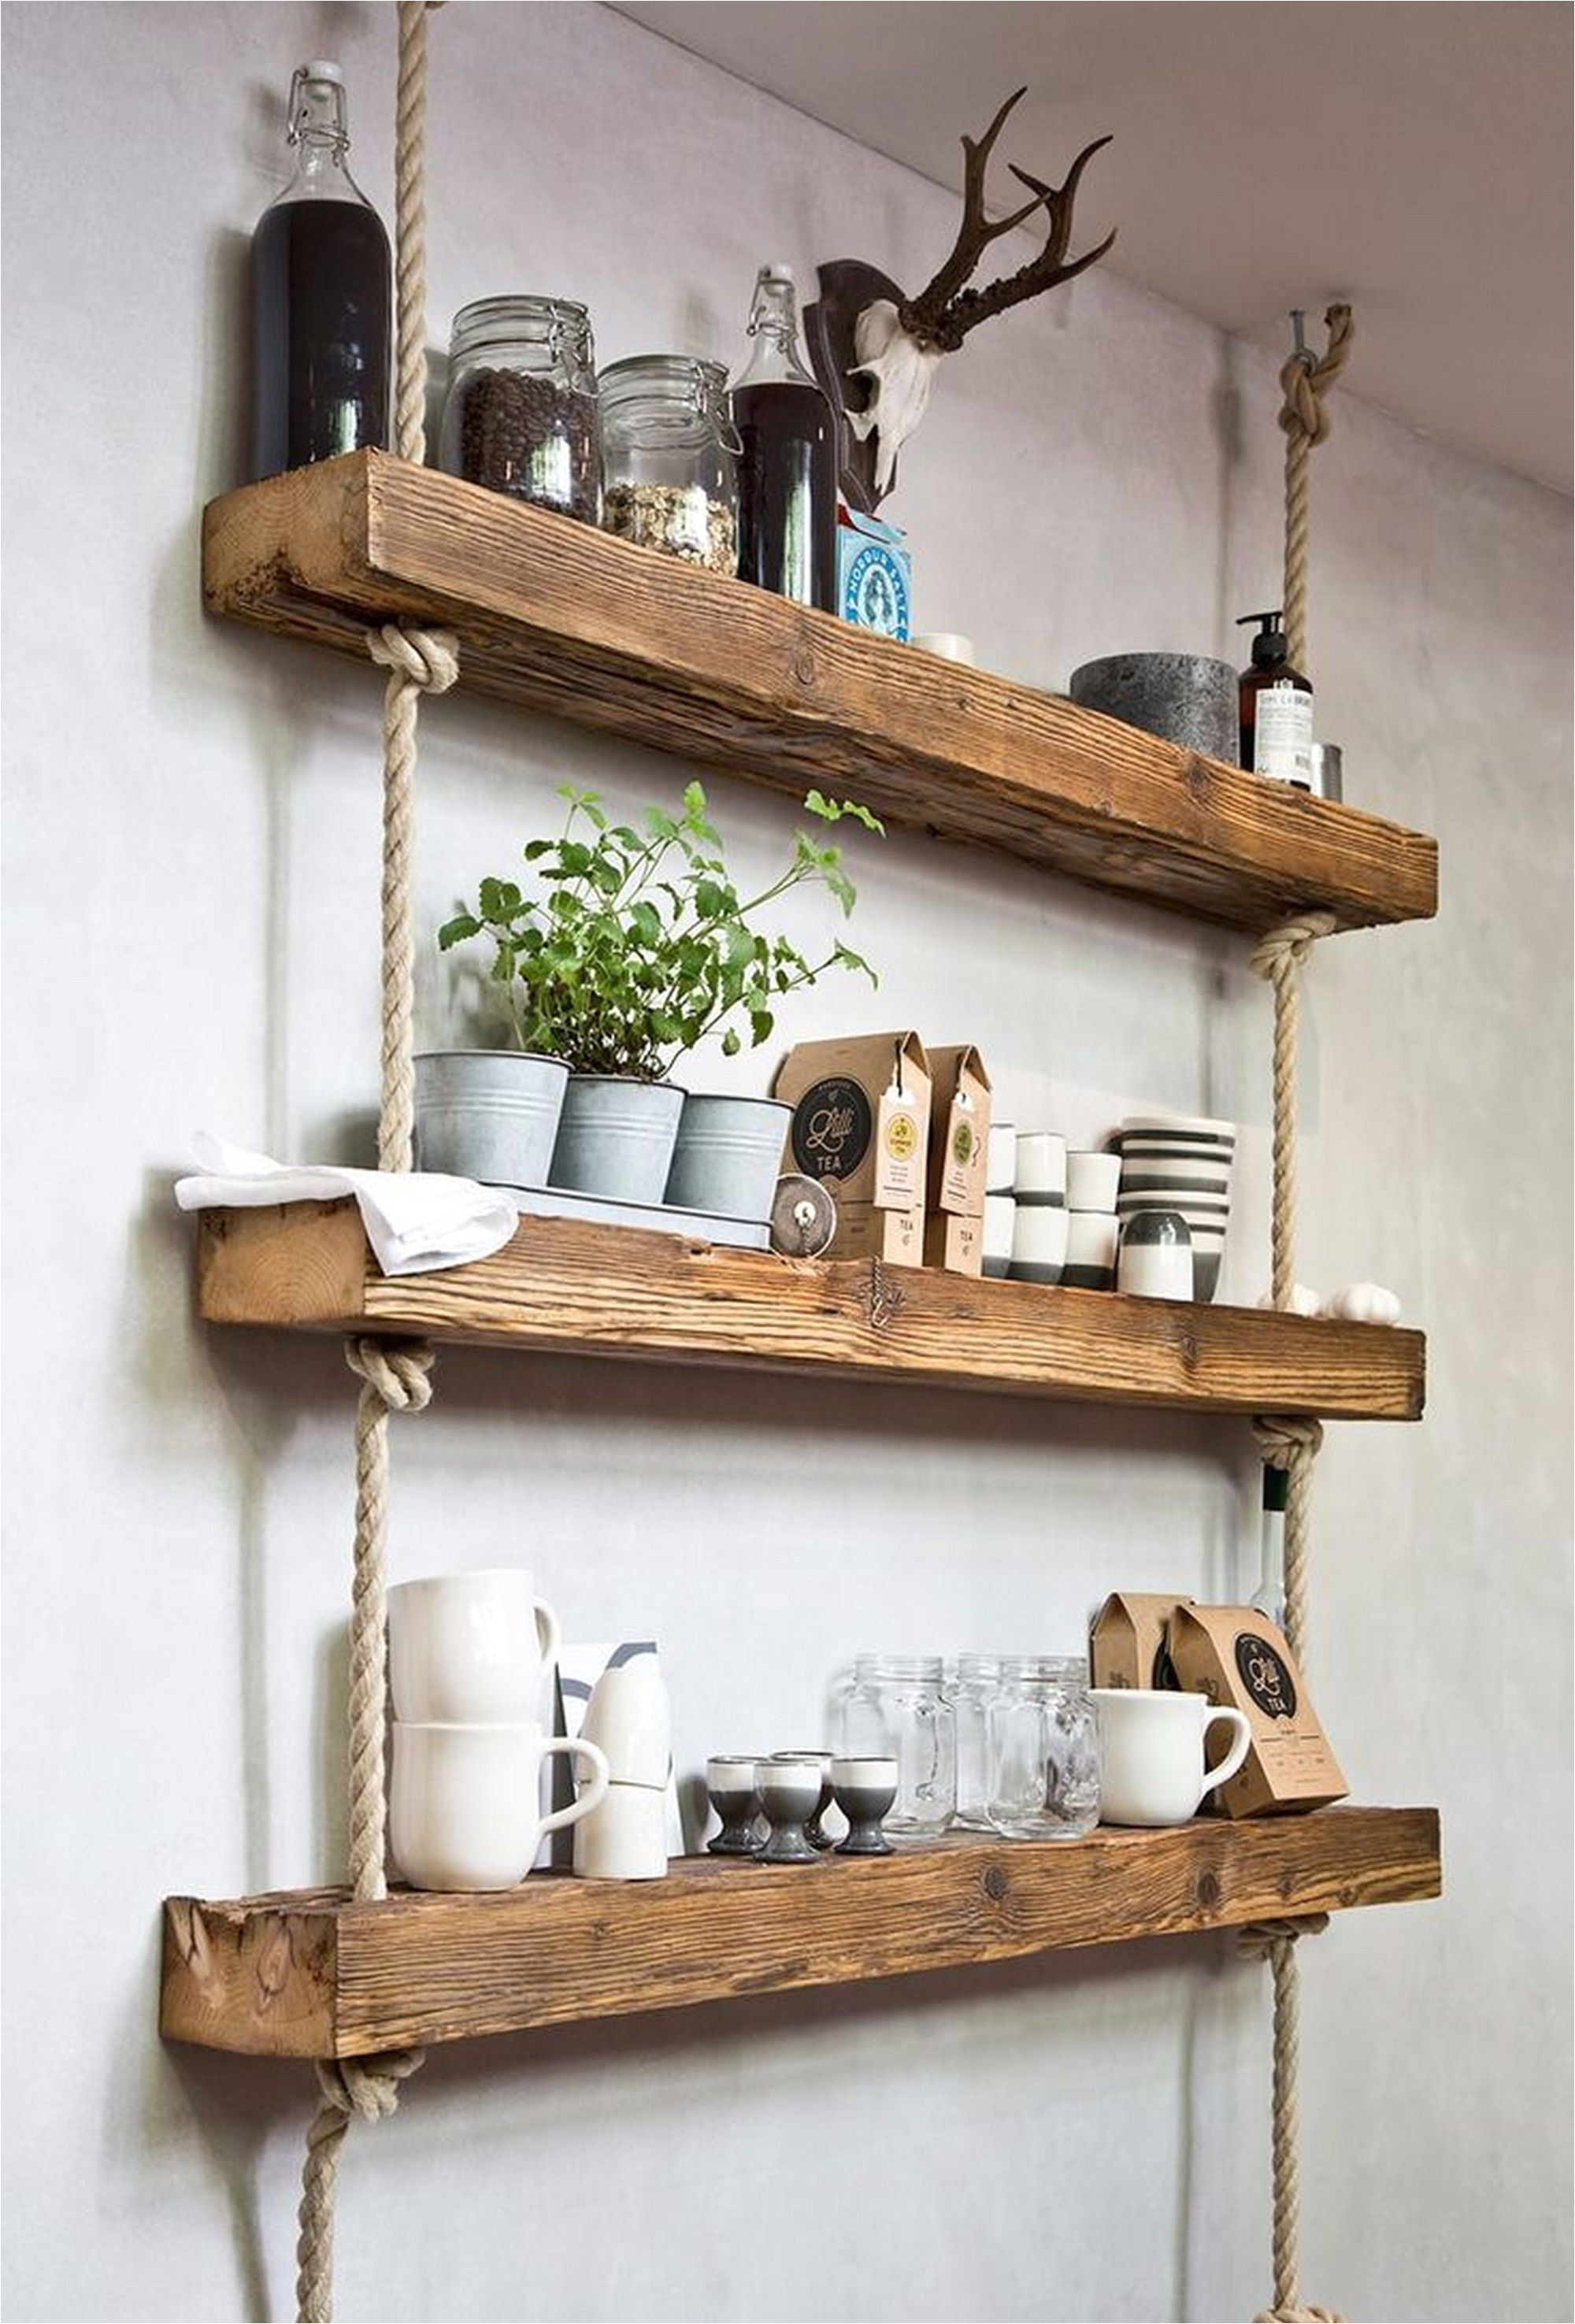 Diy Dvd Storage Ideas Easy and Stylish Diy Wooden Wall Shelves Ideas Wooden Pallet